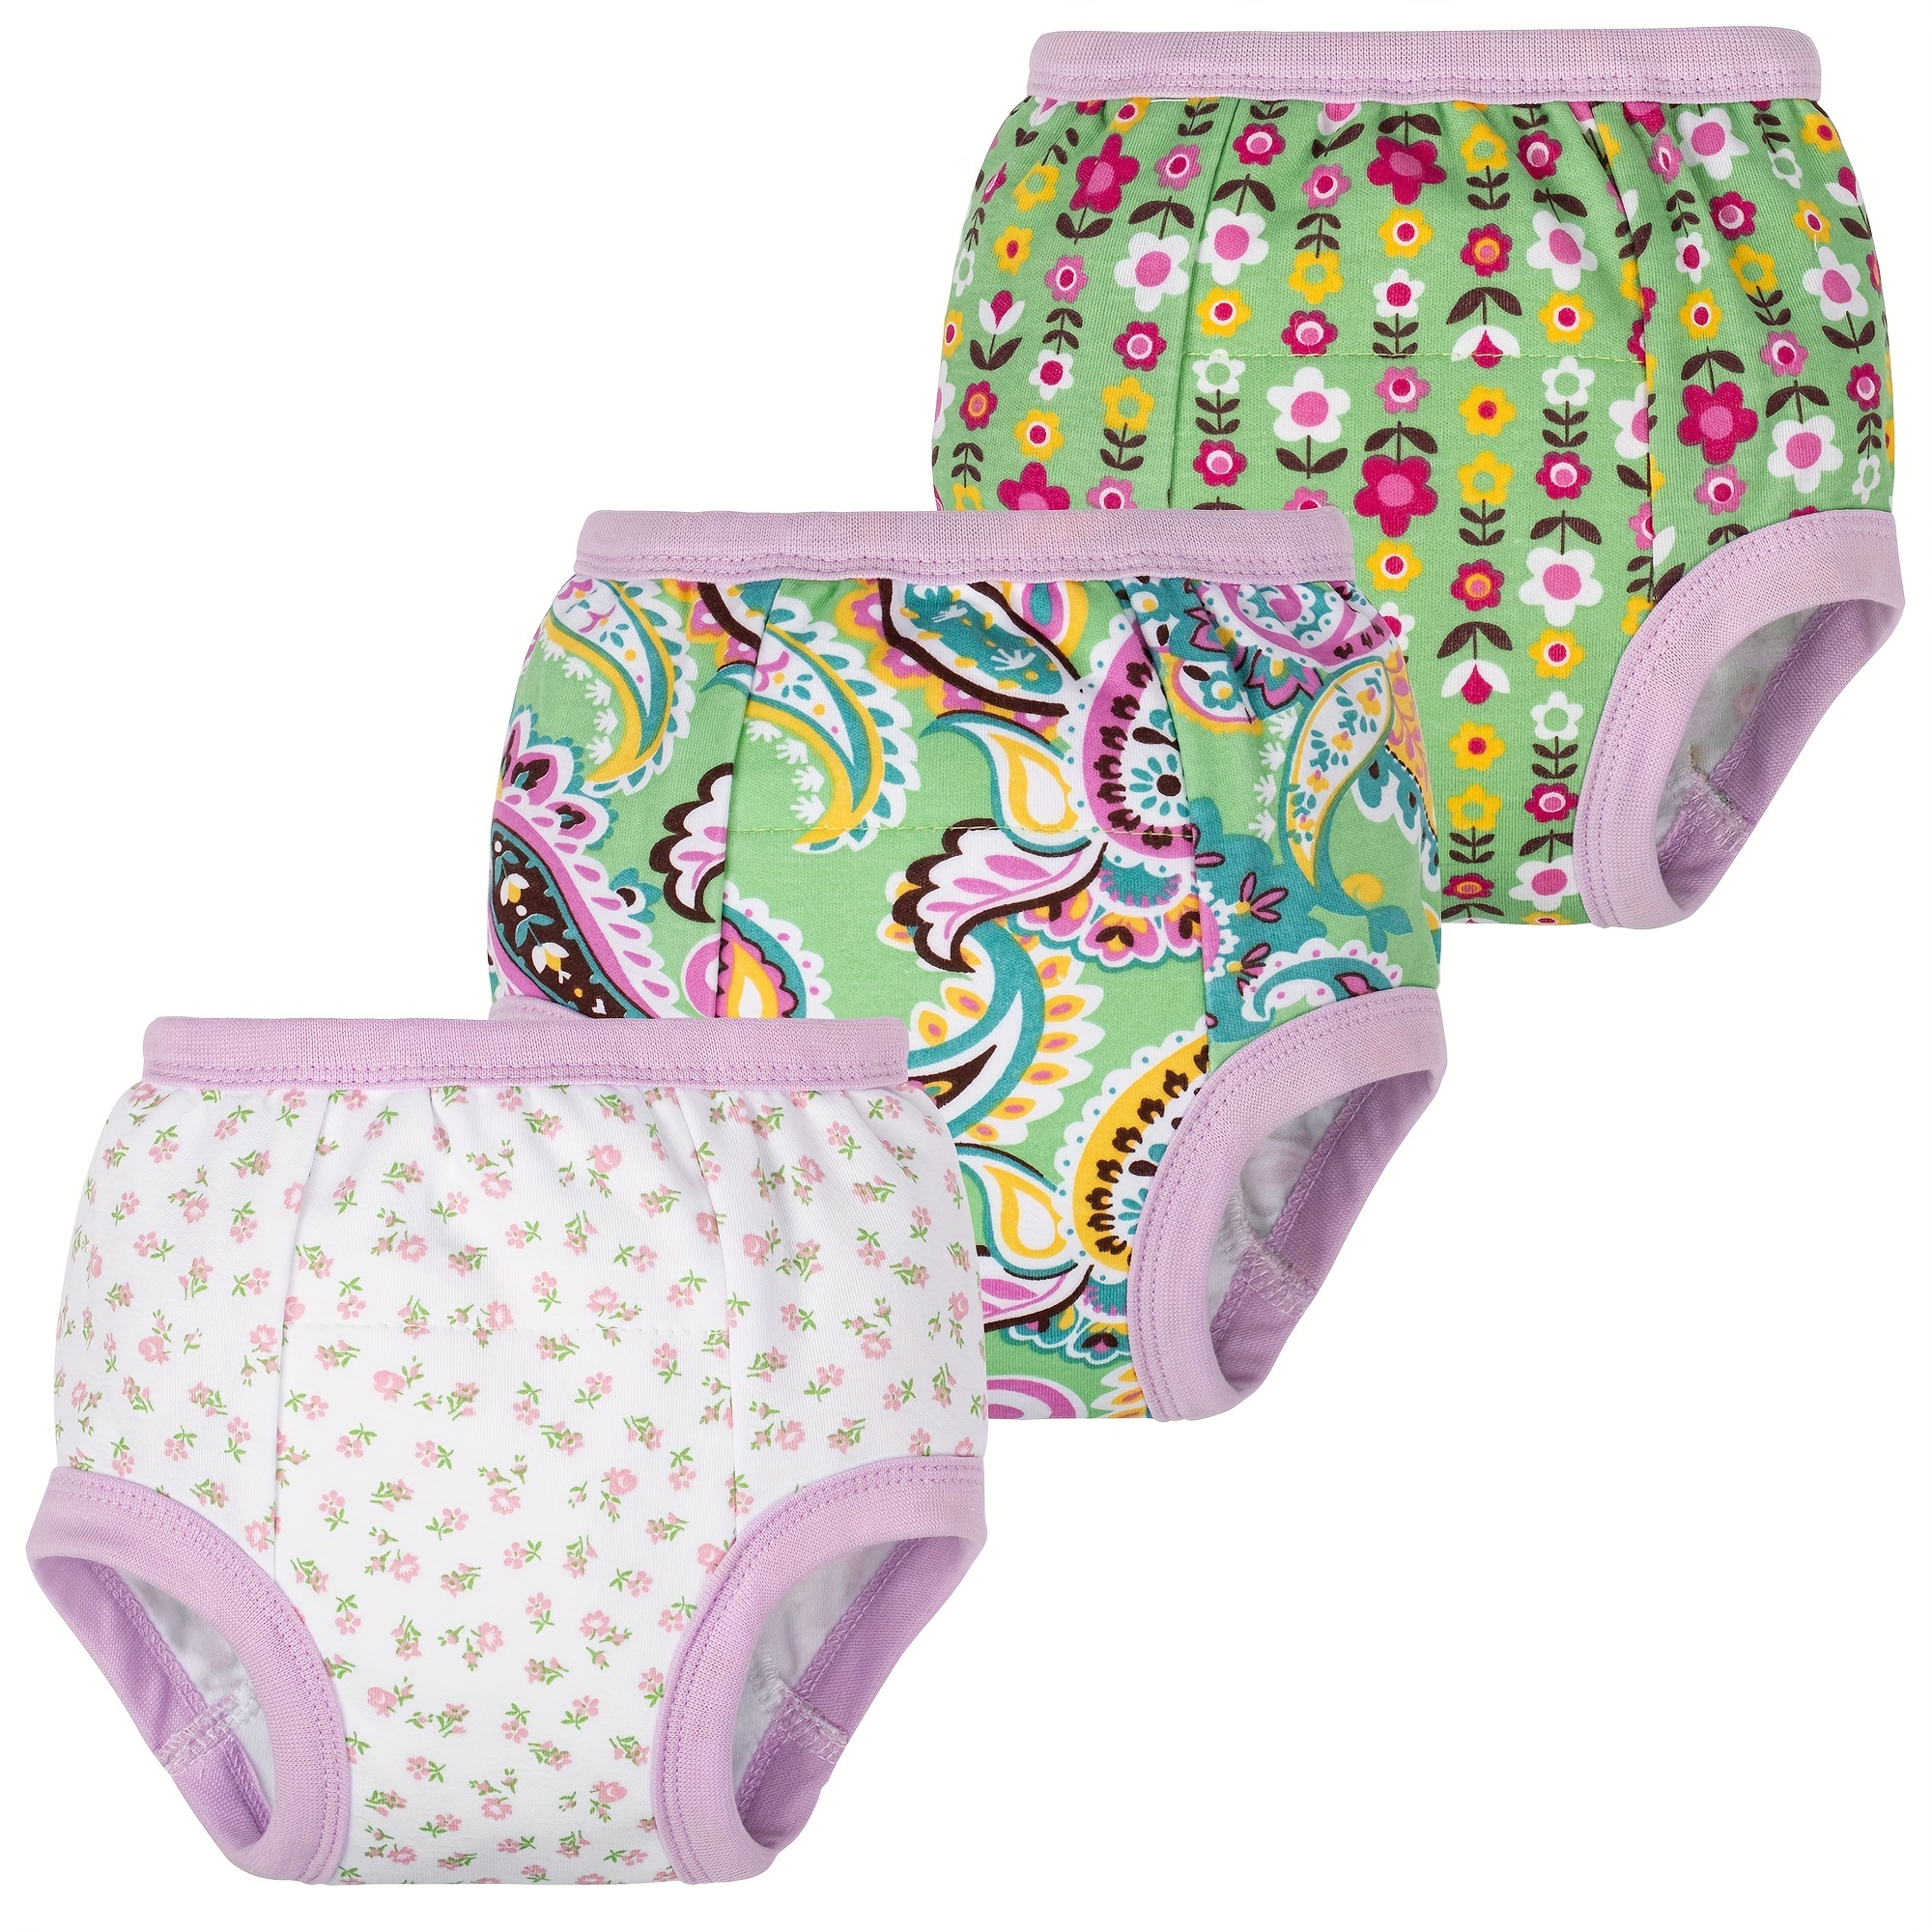 Baby Training Pants Diapers Cotton Baby Toilet Training Underwear